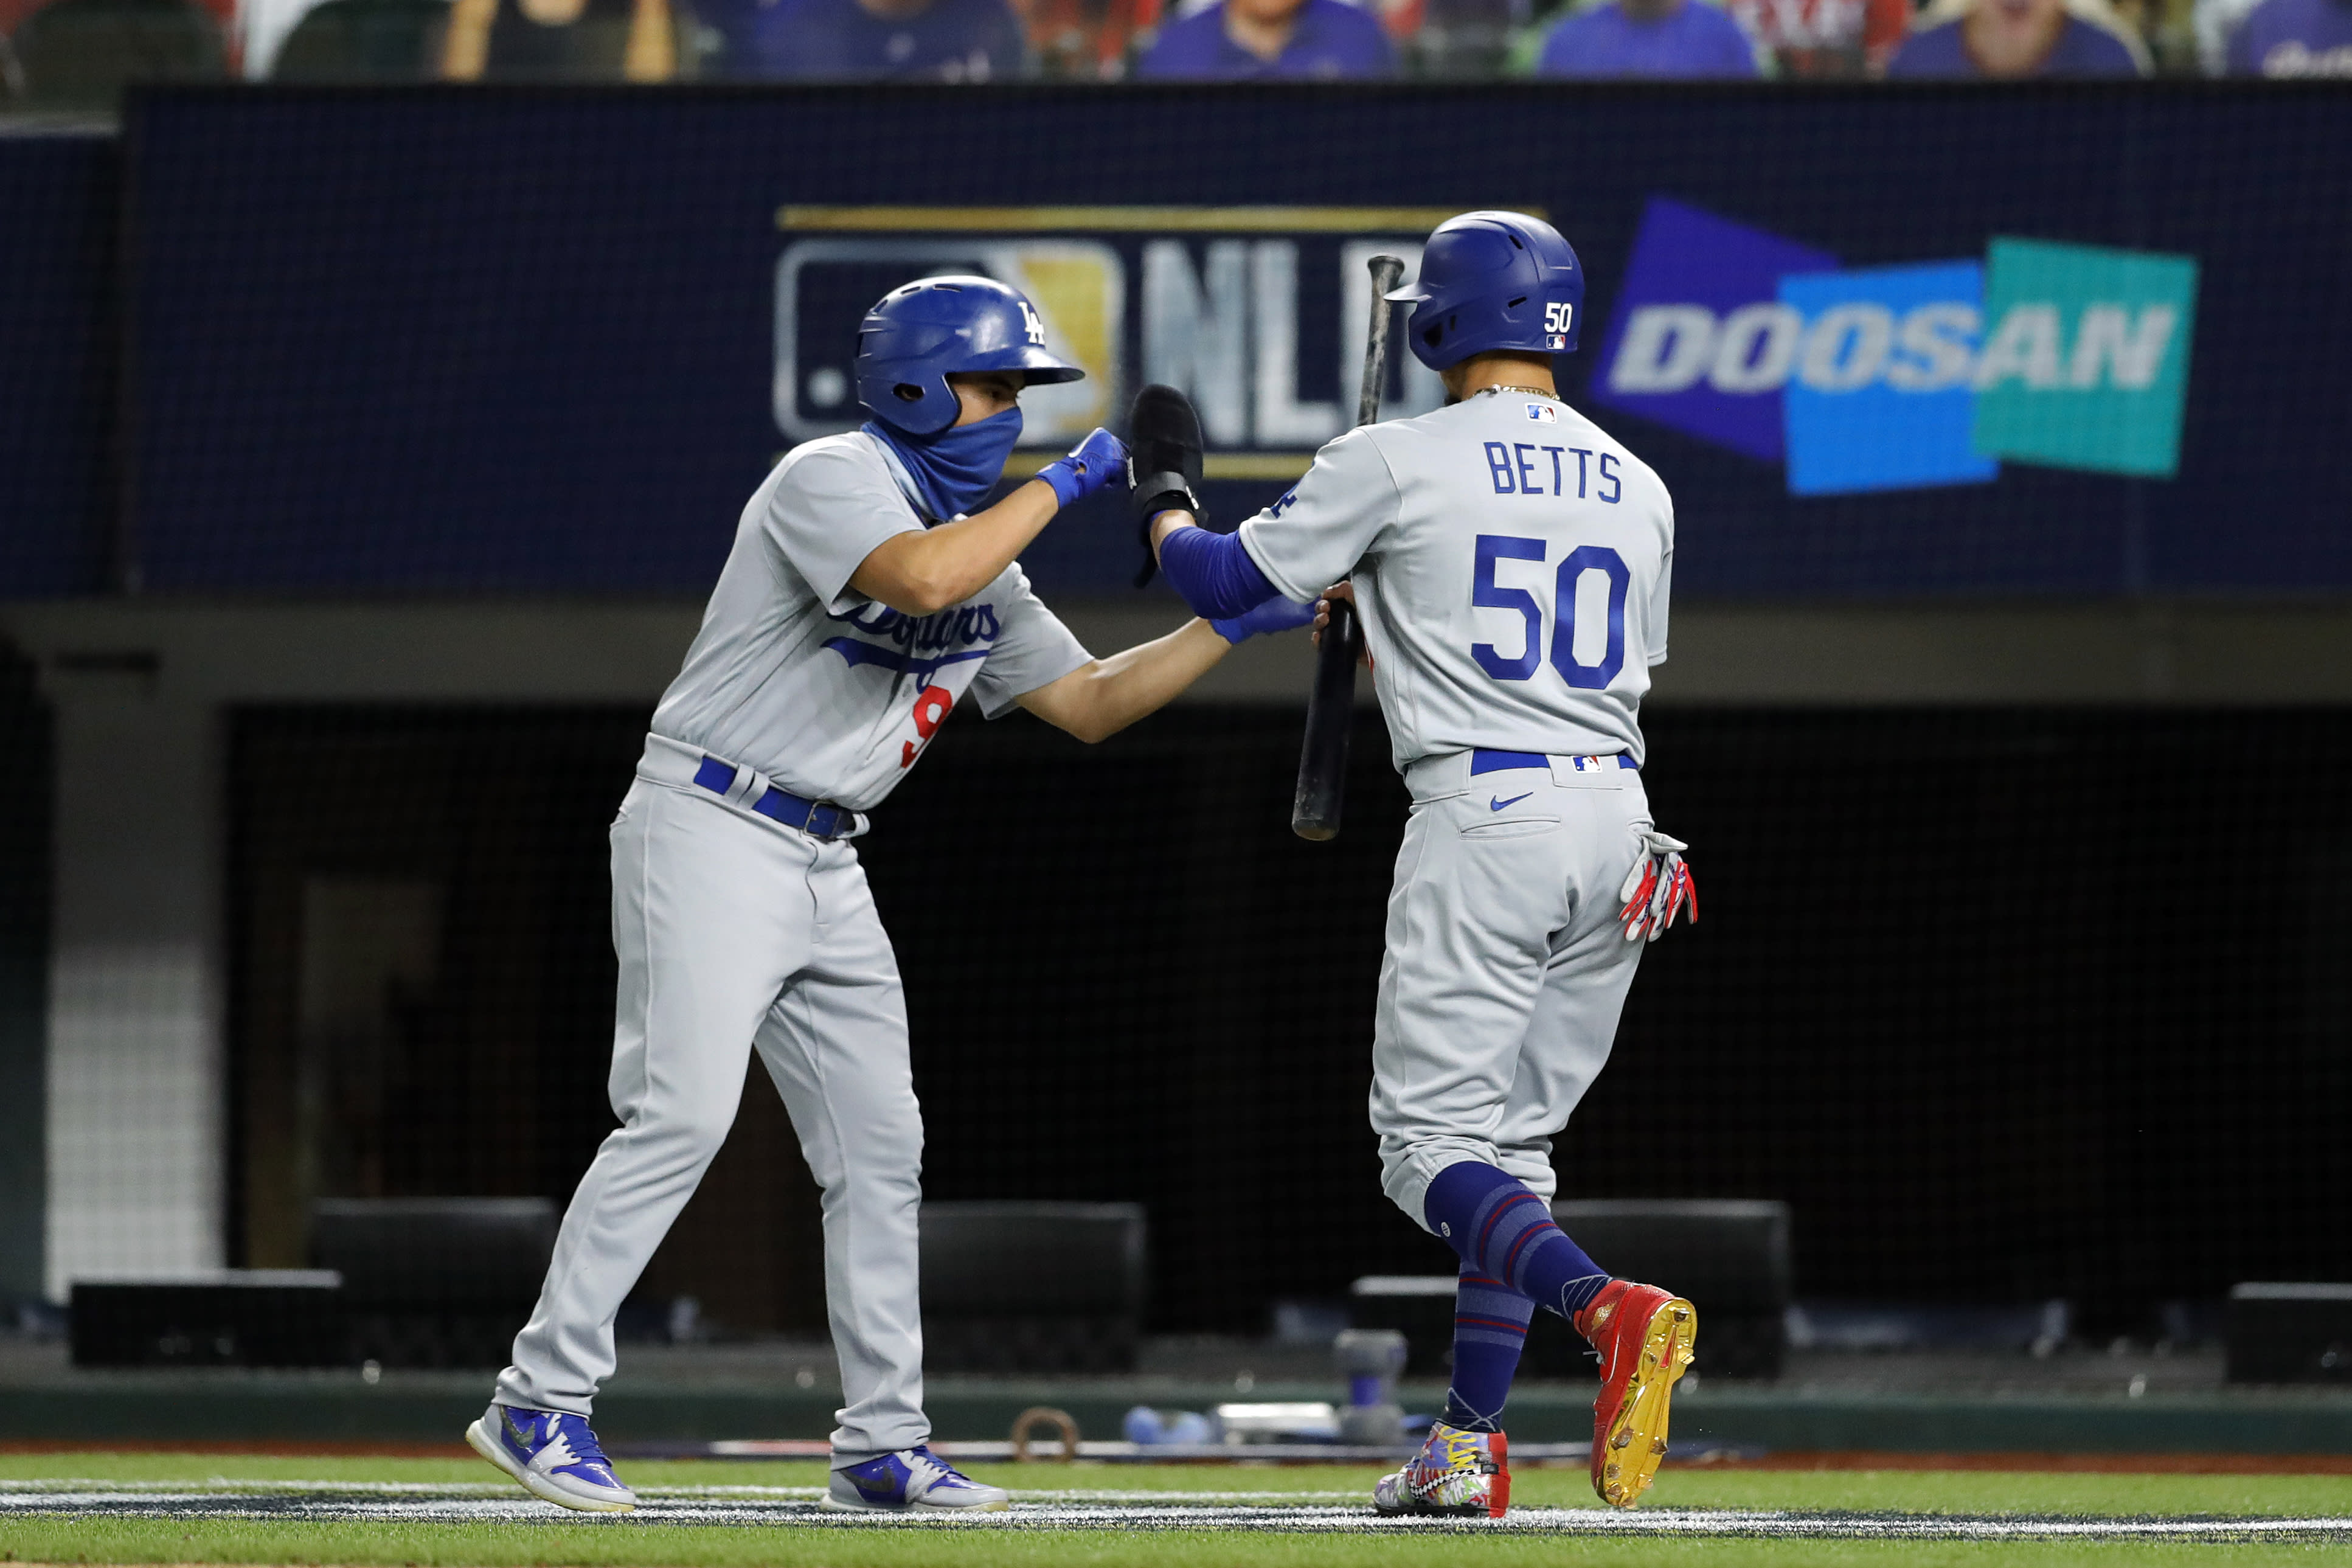 MLB postseason: Scores, highlights results and schedules